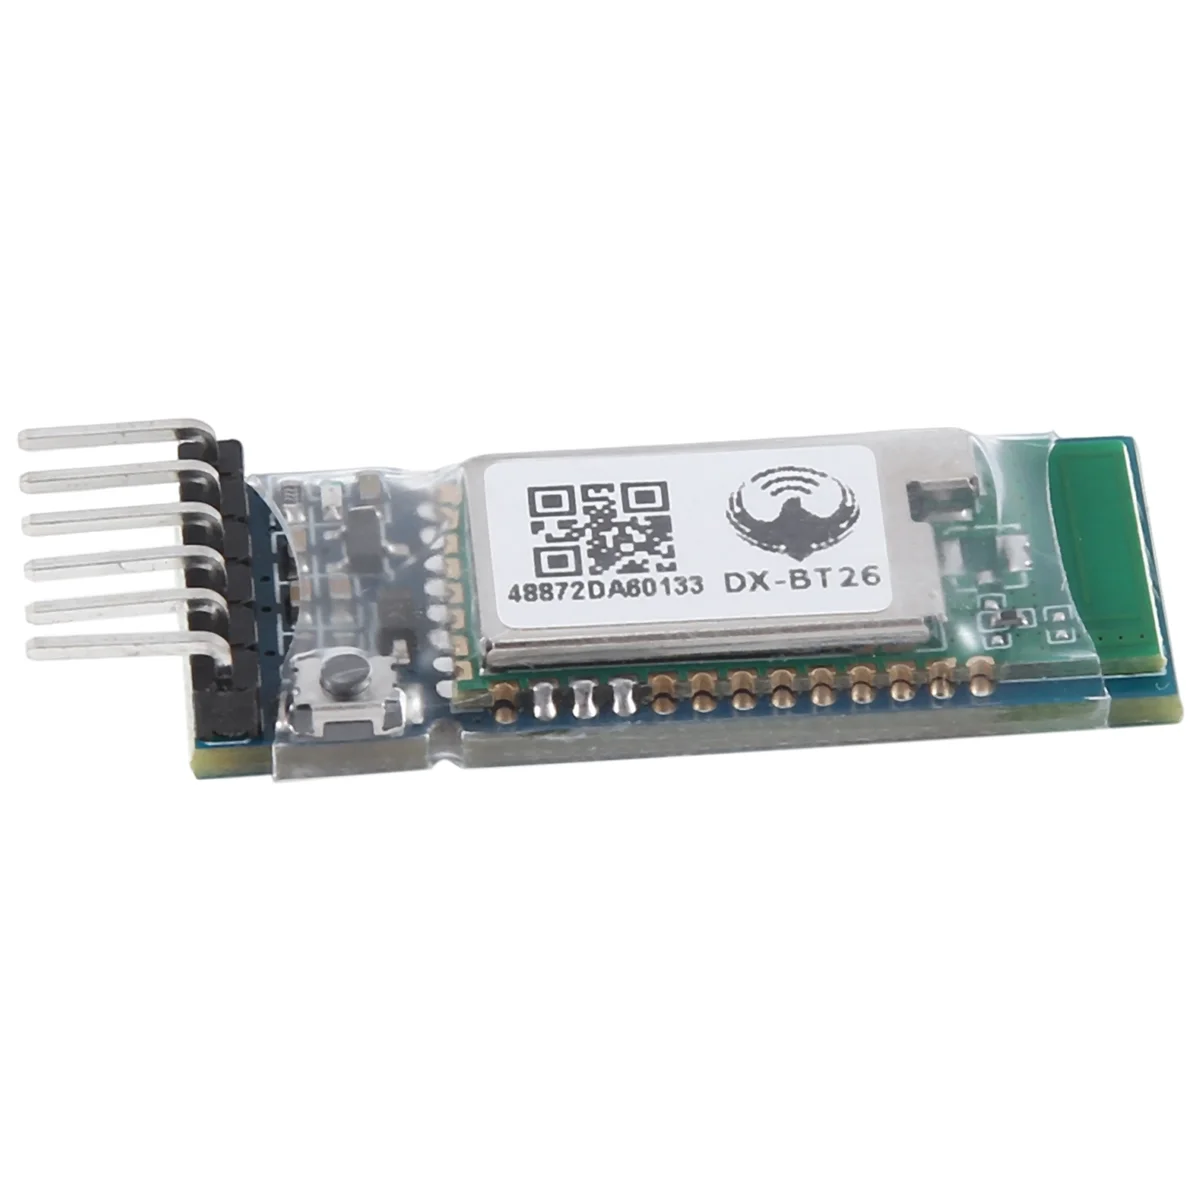 

Dx-Bt26 Bluetooth Module with Backplane Multi-Phone Connection Ble5.0 Low Power Wireless Serial Transmission Module